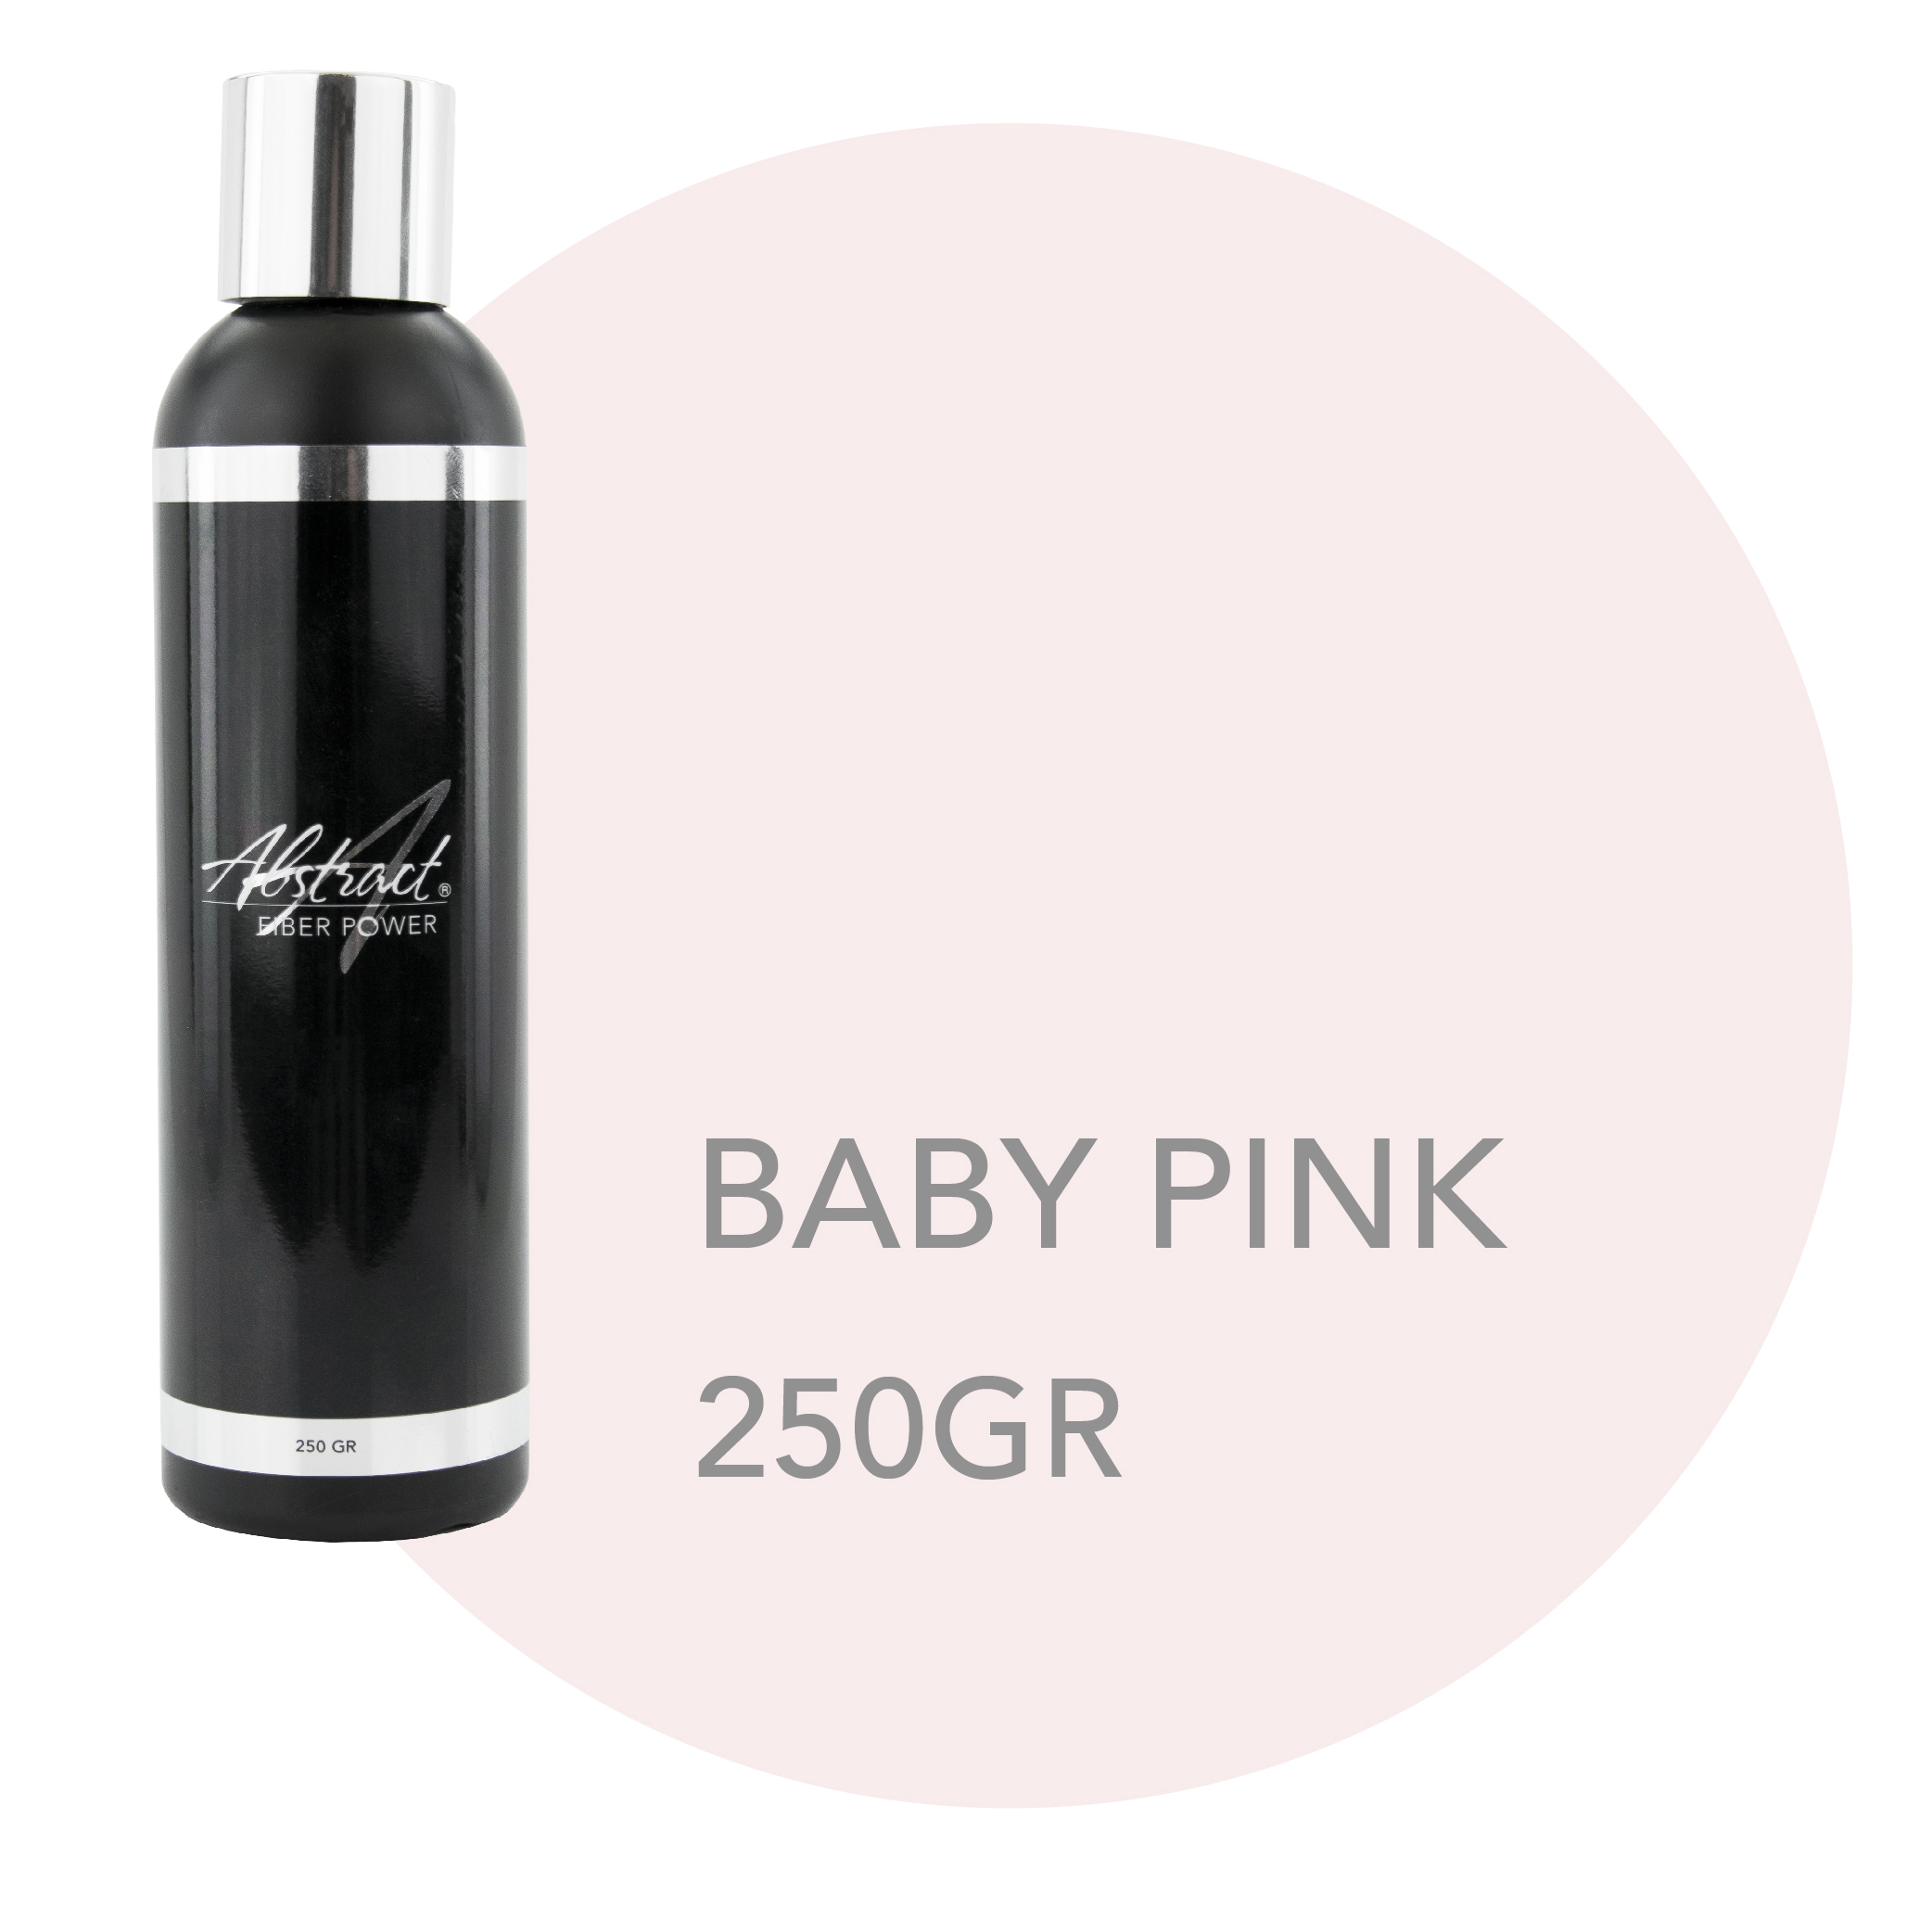 Fiber Power BABY PINK 250gr, Abstract | 186819